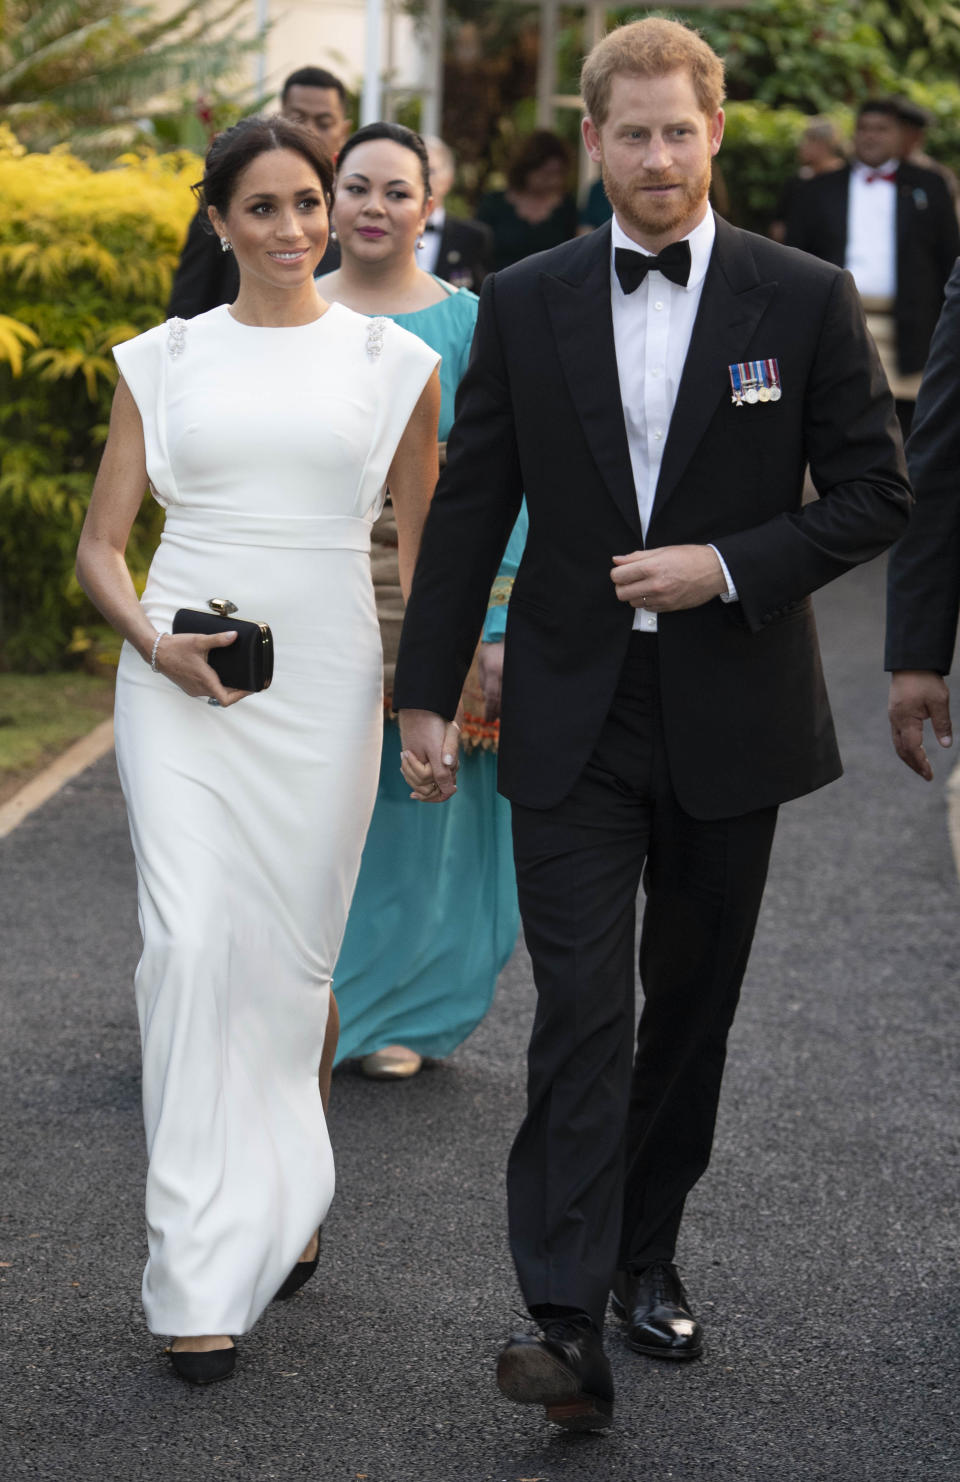 Meghan Markle and Prince Harry arrived for an official dinner with the King and Queen of Tonga on Thursday night. Photo: AAP